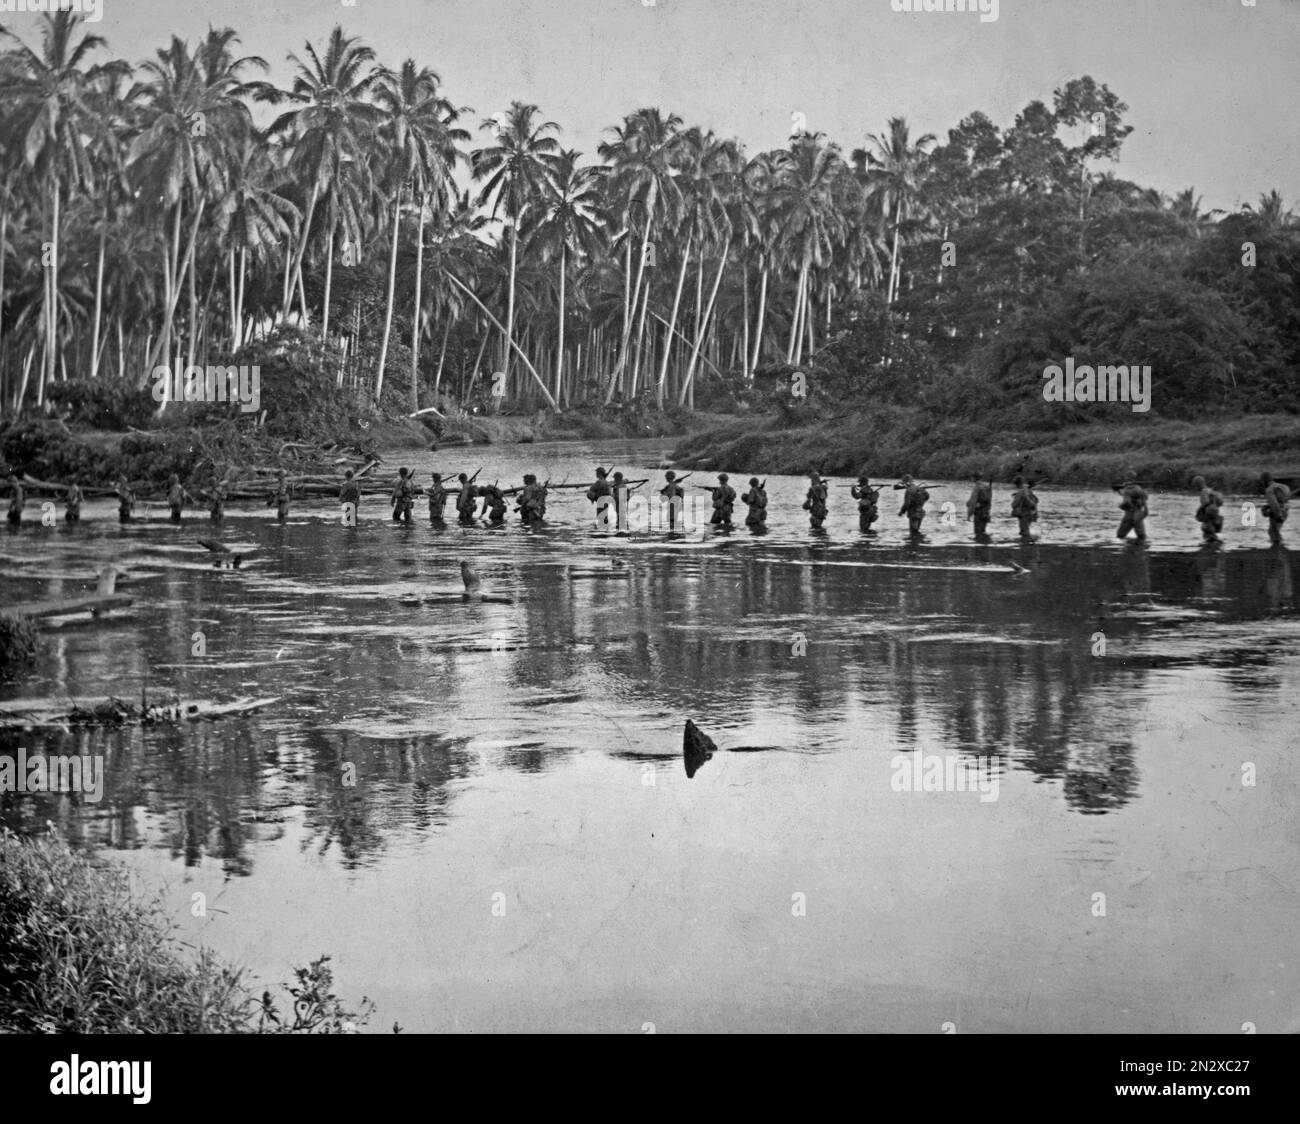 GUADALCANAL, SOLOMON ISLANDS - circa 1942-1943 - US Marines cross a body of water on an evening patrol during the Battle of Guadalcanal in the Solomon Stock Photo